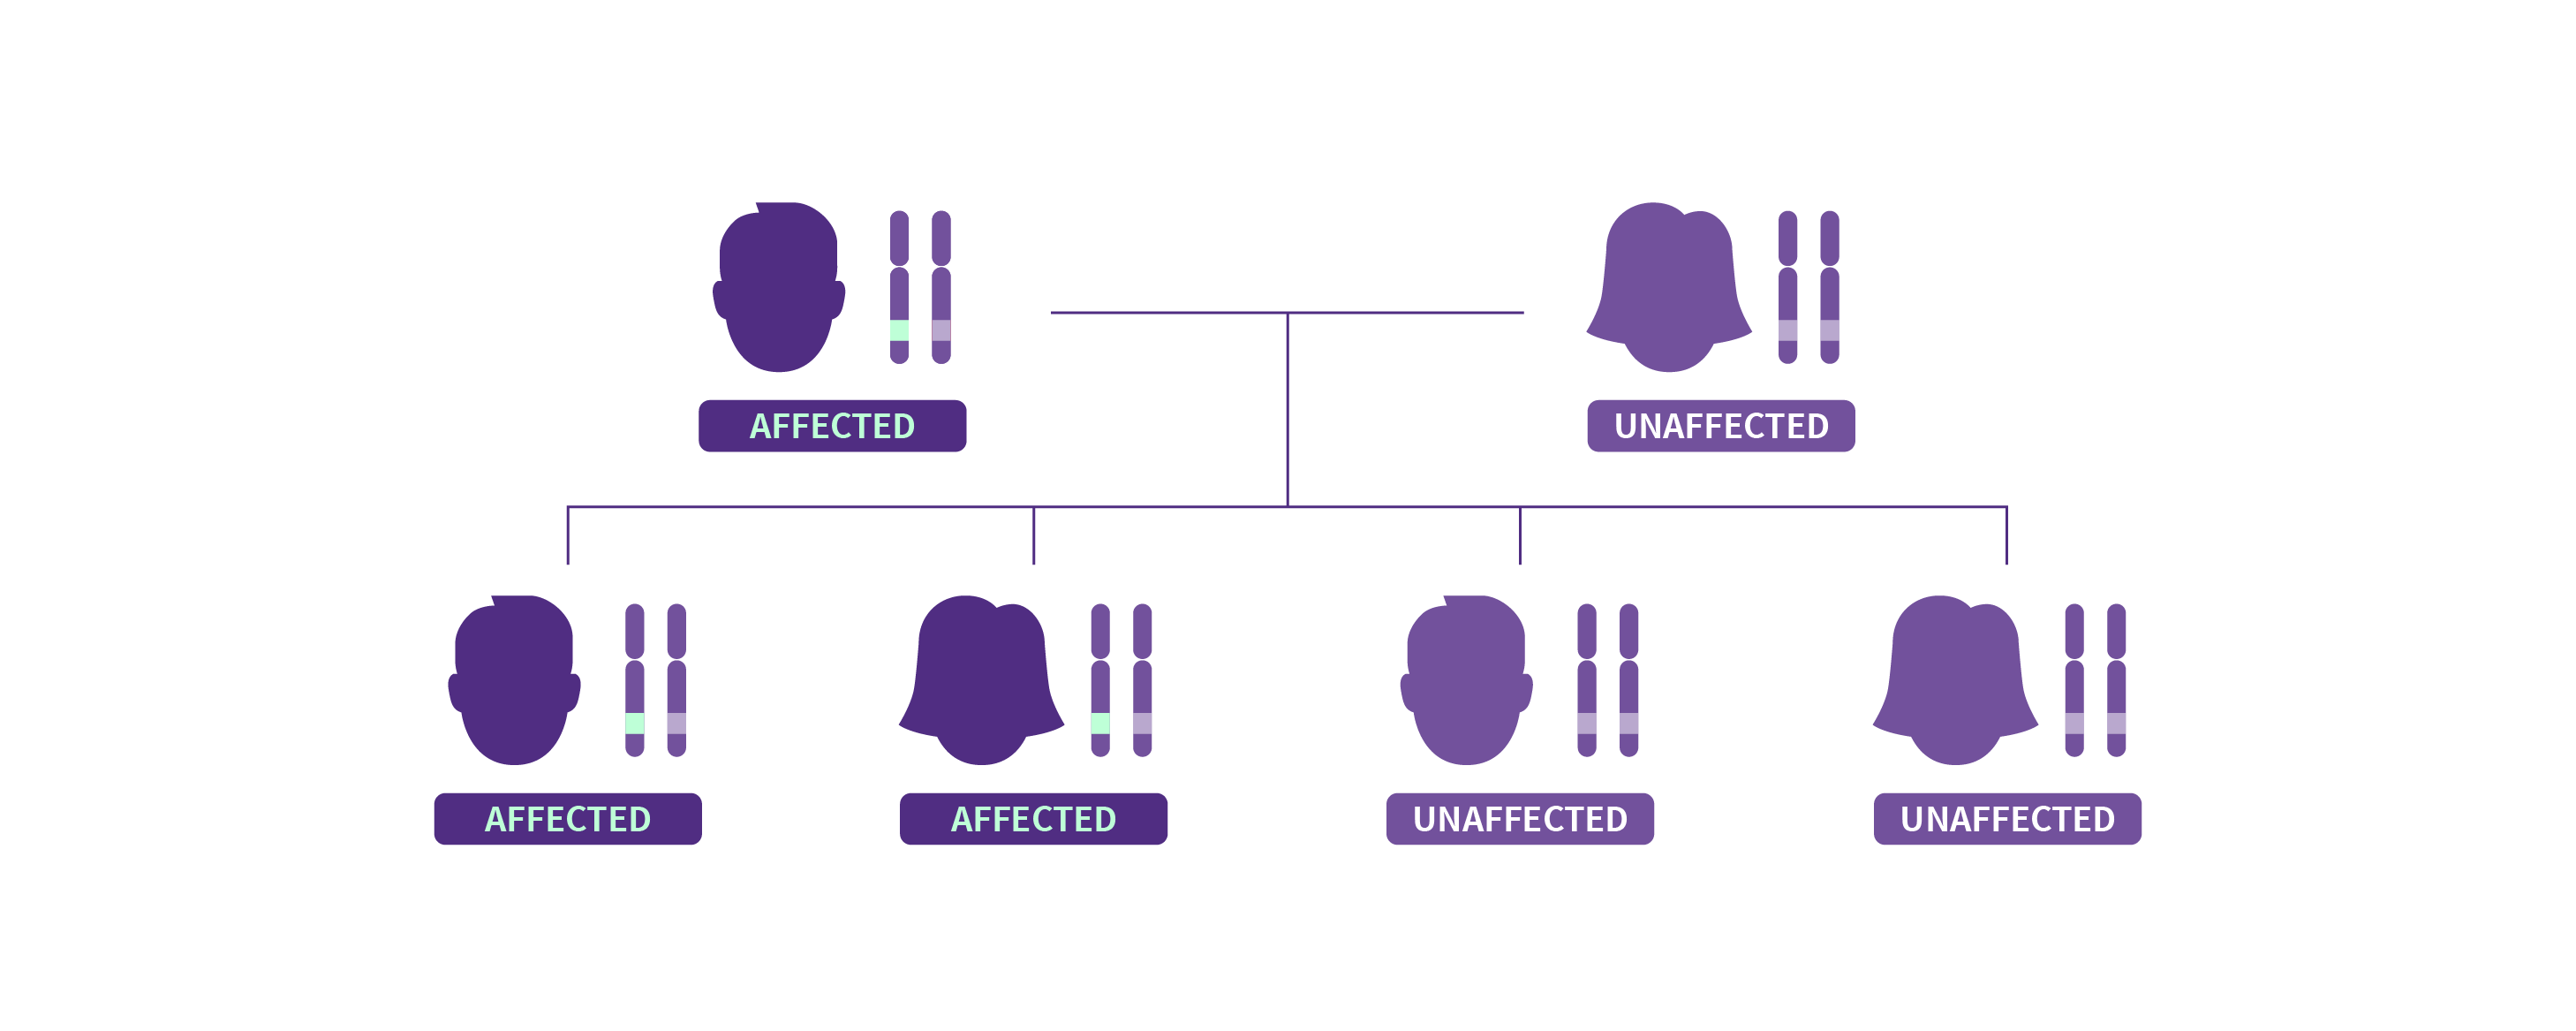 A family tree showing autosomal dominant inheritance pattern of Dravet syndrome.